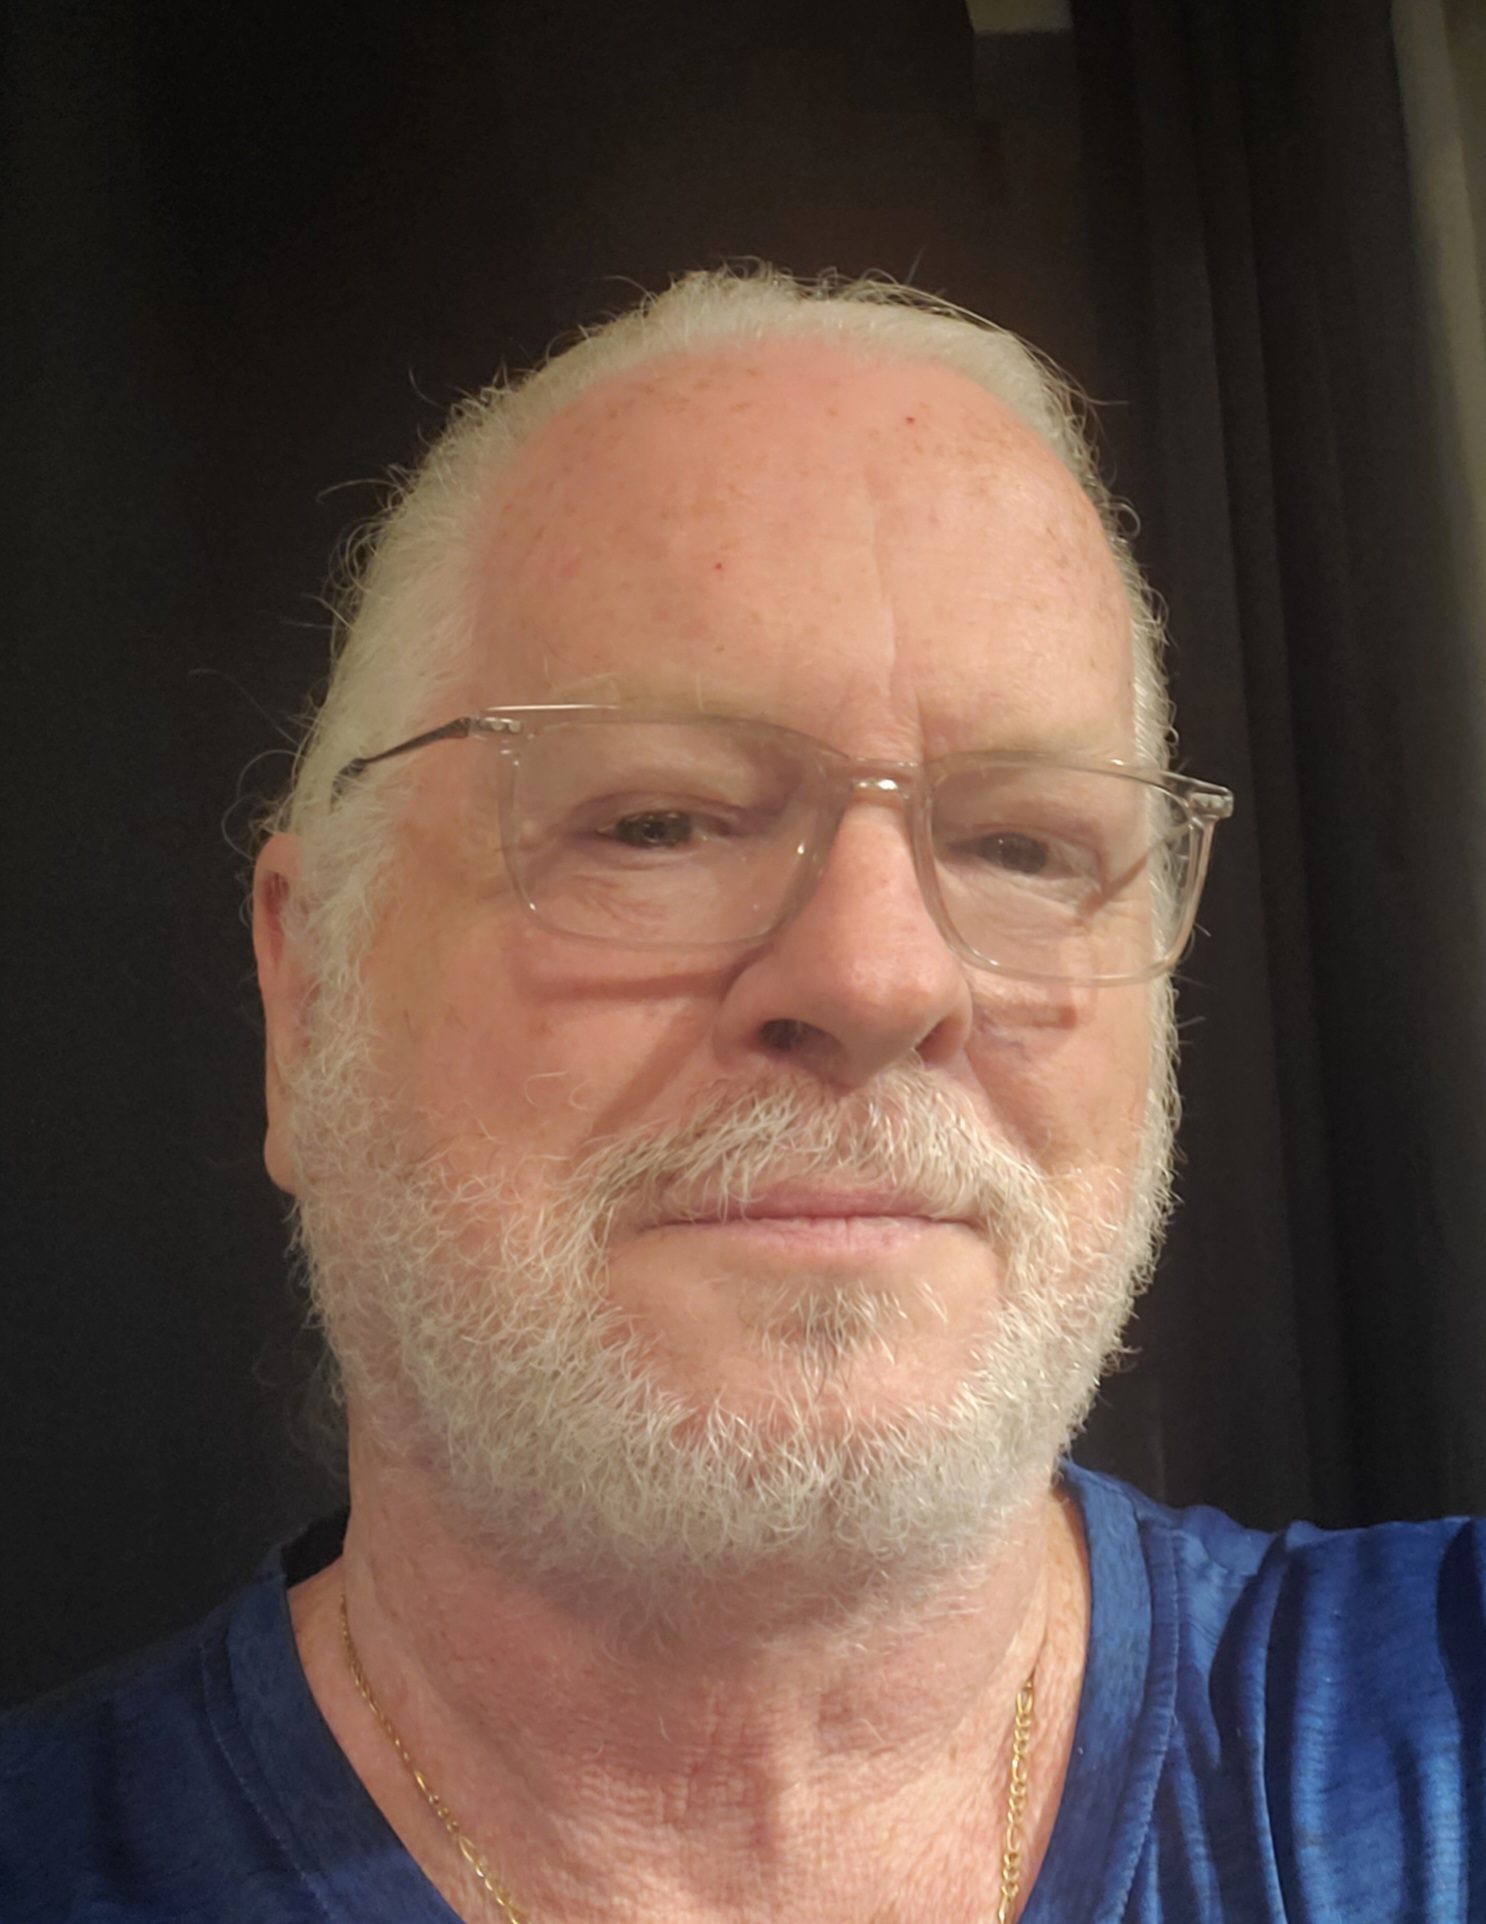 A selfie of David Yerks-Young, a white man with white hair and a white beard wearing glasses, looking serious for the camera